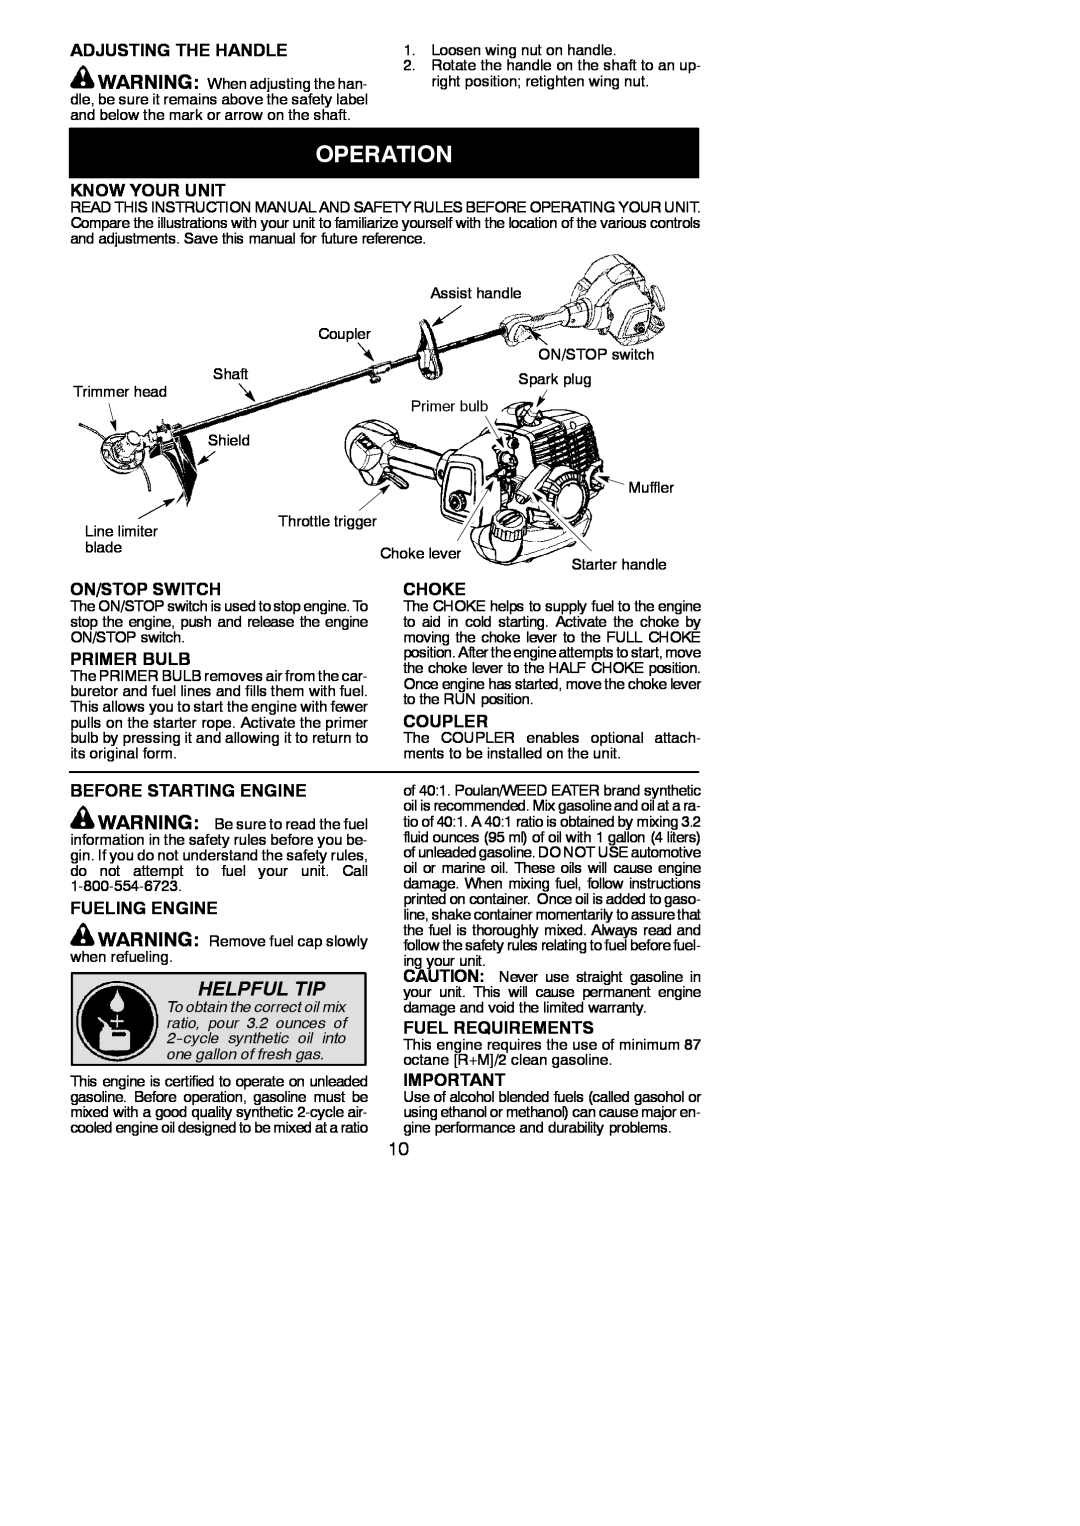 Poulan 952711944 Operation, Helpful Tip, Adjusting The Handle, Know Your Unit, On/Stop Switch, Choke, Primer Bulb, Coupler 